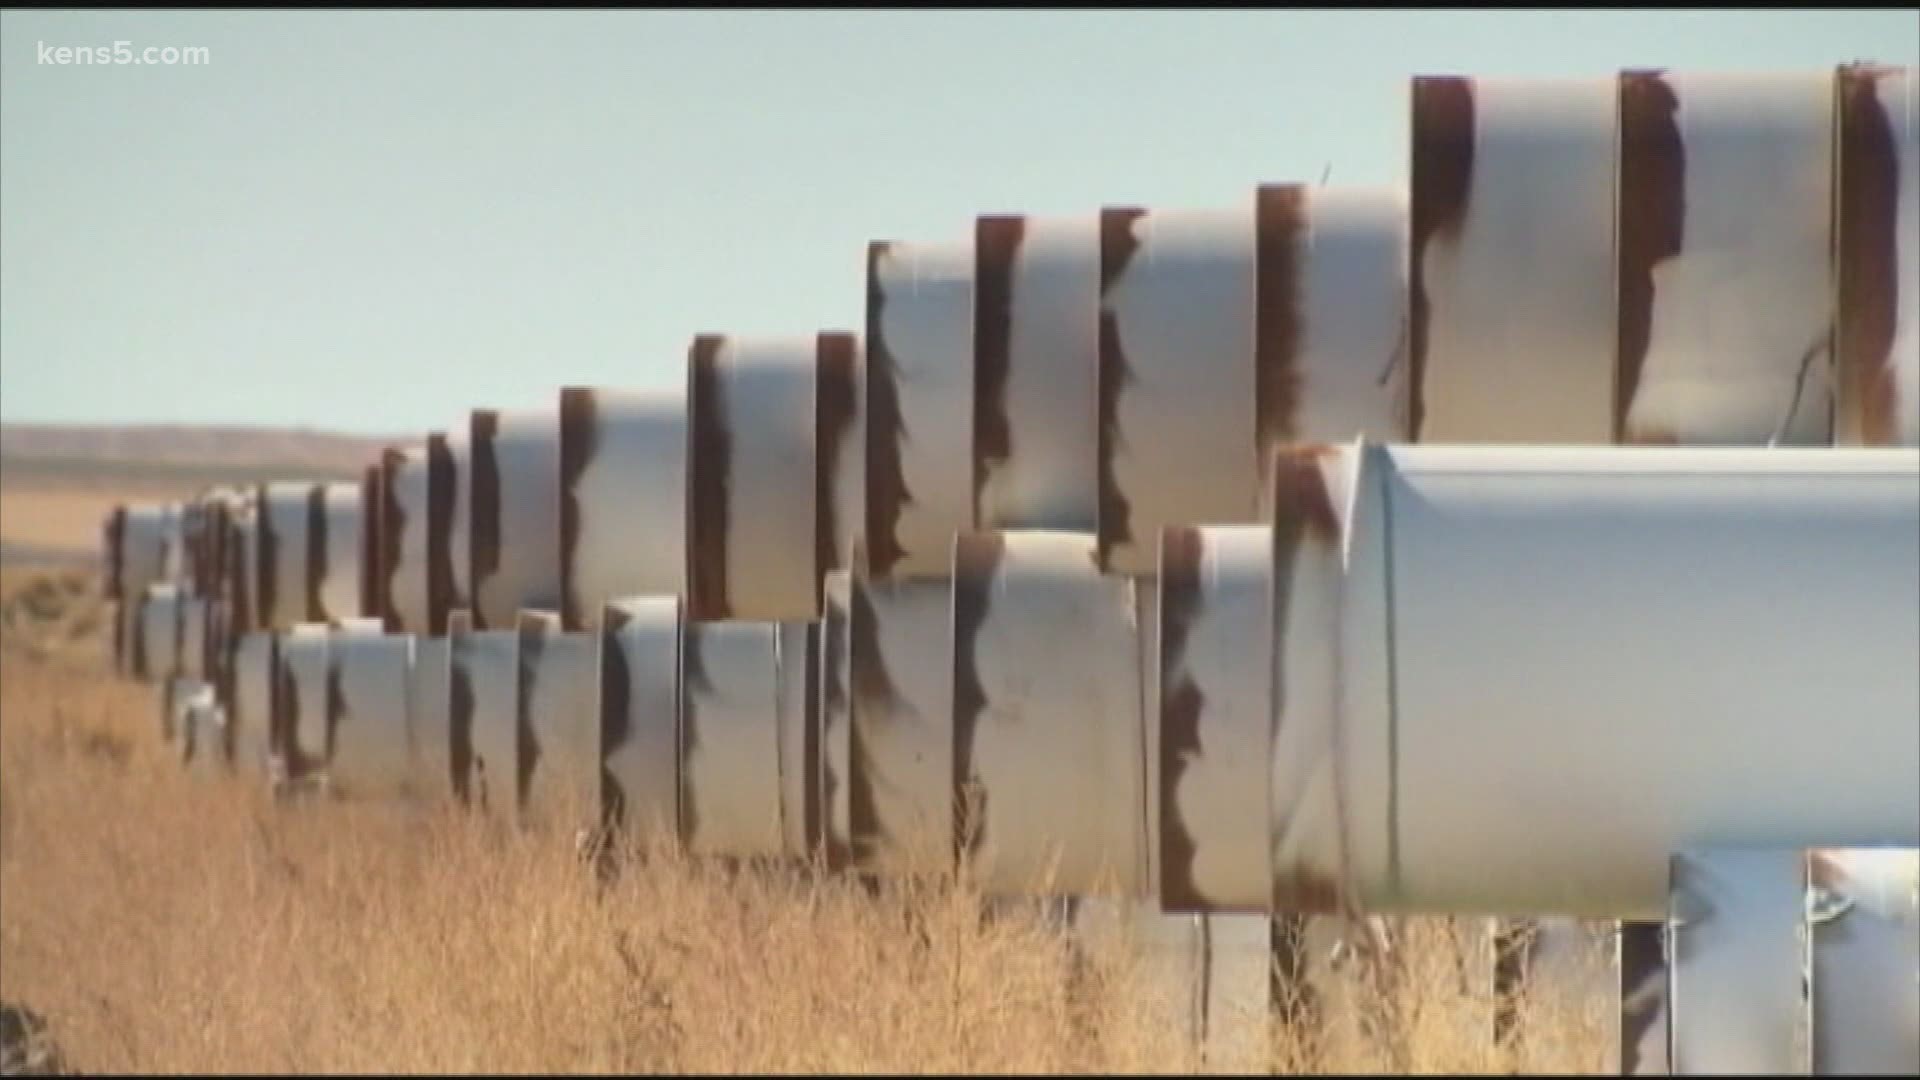 Experts said the move did little to harm the number of permanent jobs coming from the pipeline.